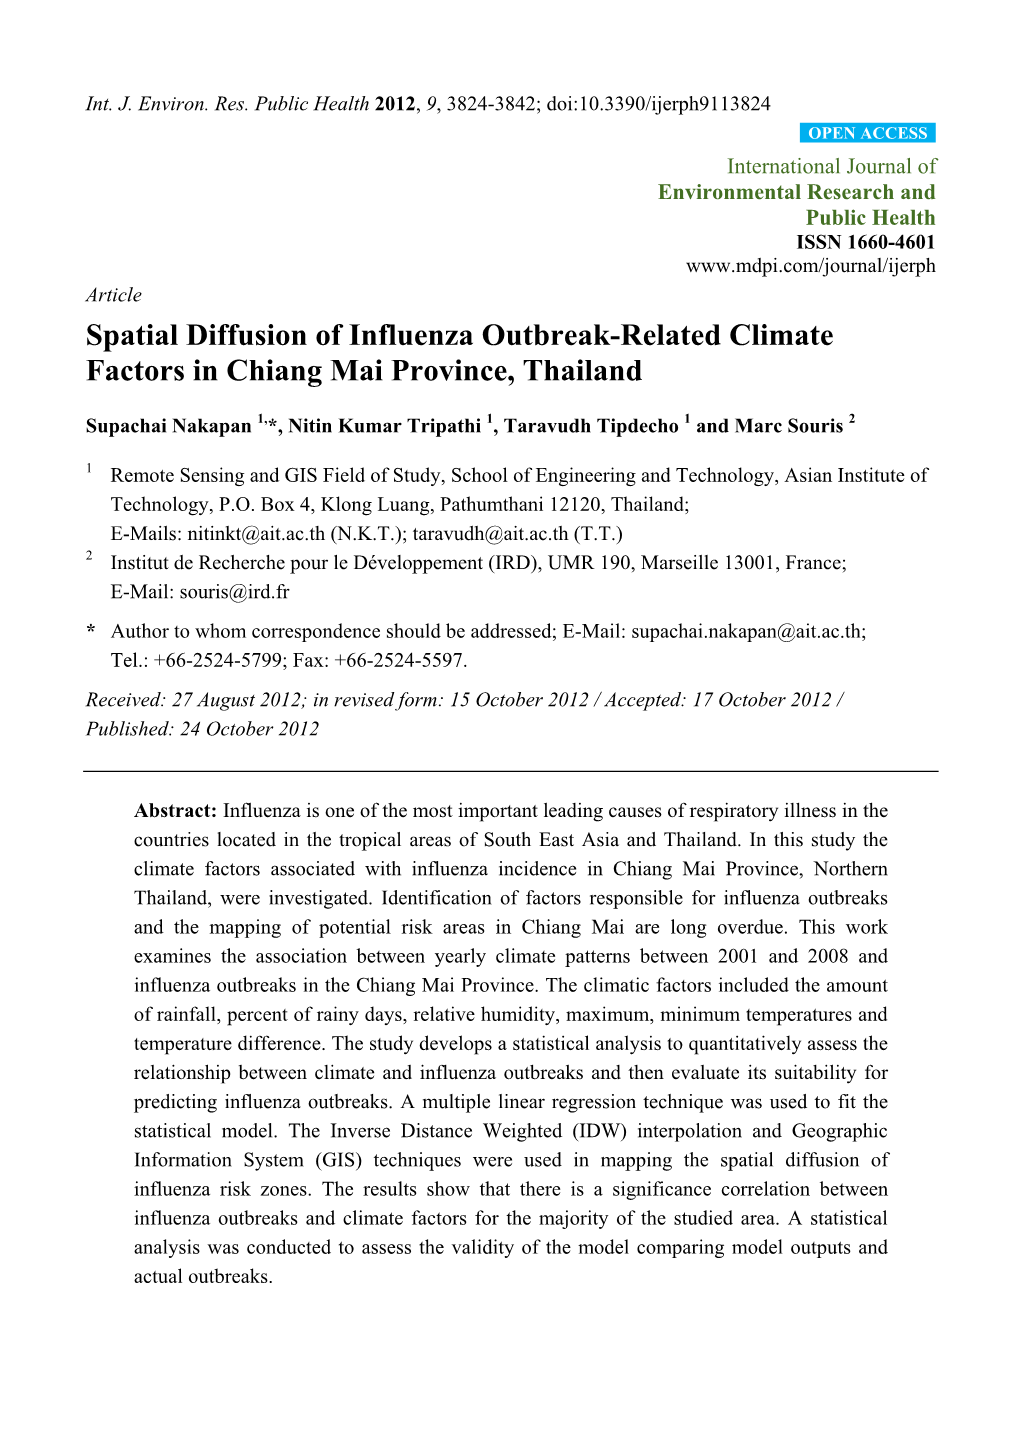 Spatial Diffusion of Influenza Outbreak-Related Climate Factors in Chiang Mai Province, Thailand